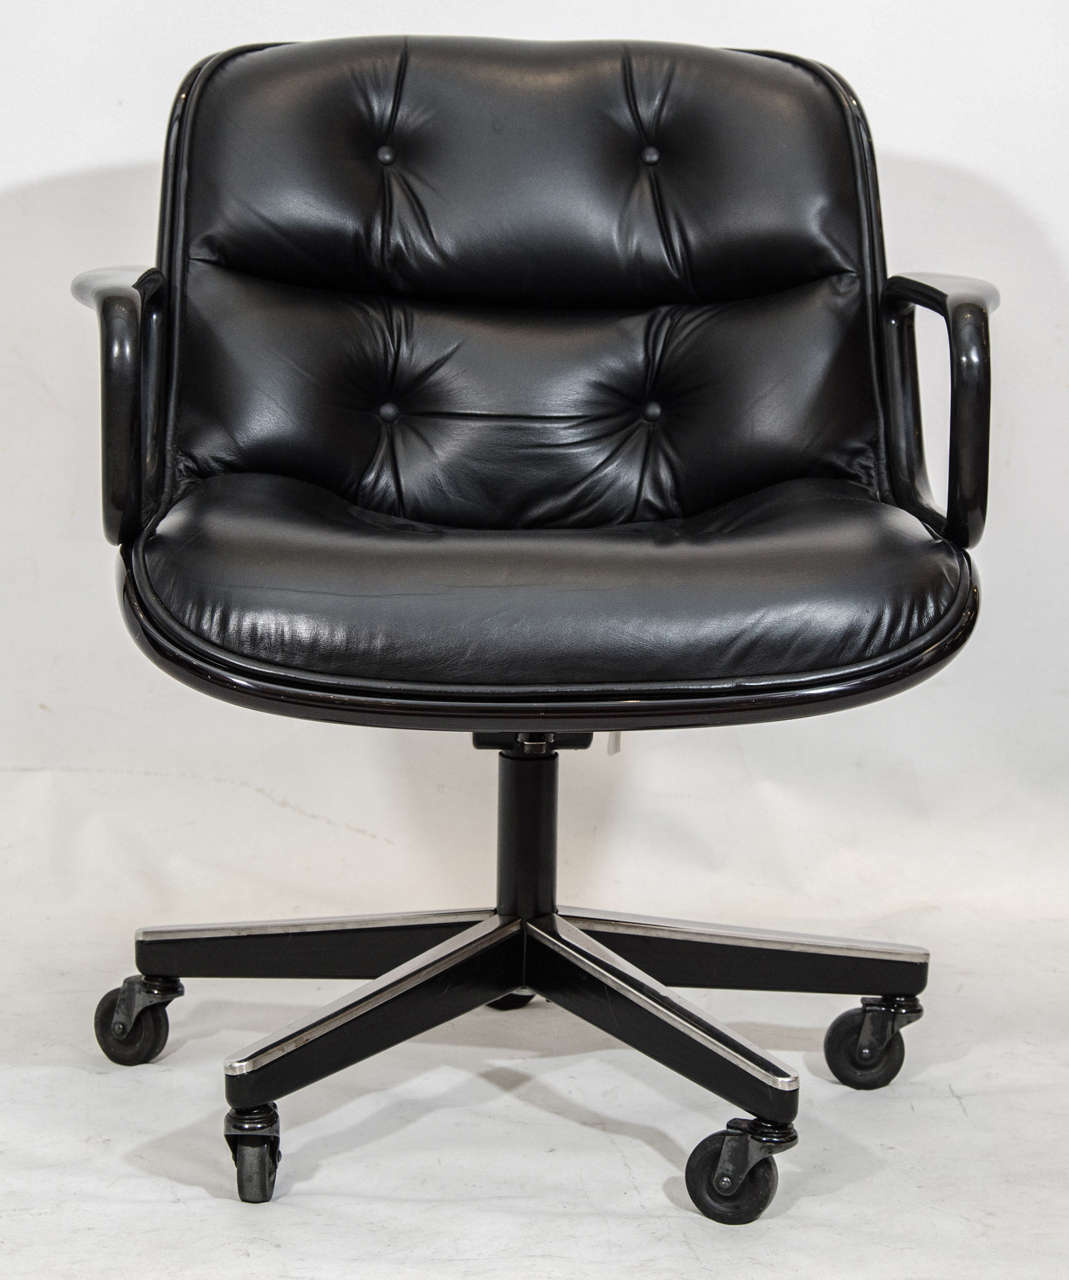 Handsome, comfortable and nicely detailed desk chair by Charles Pollock for Knoll. In black leather; adjustable. Please contact for location.